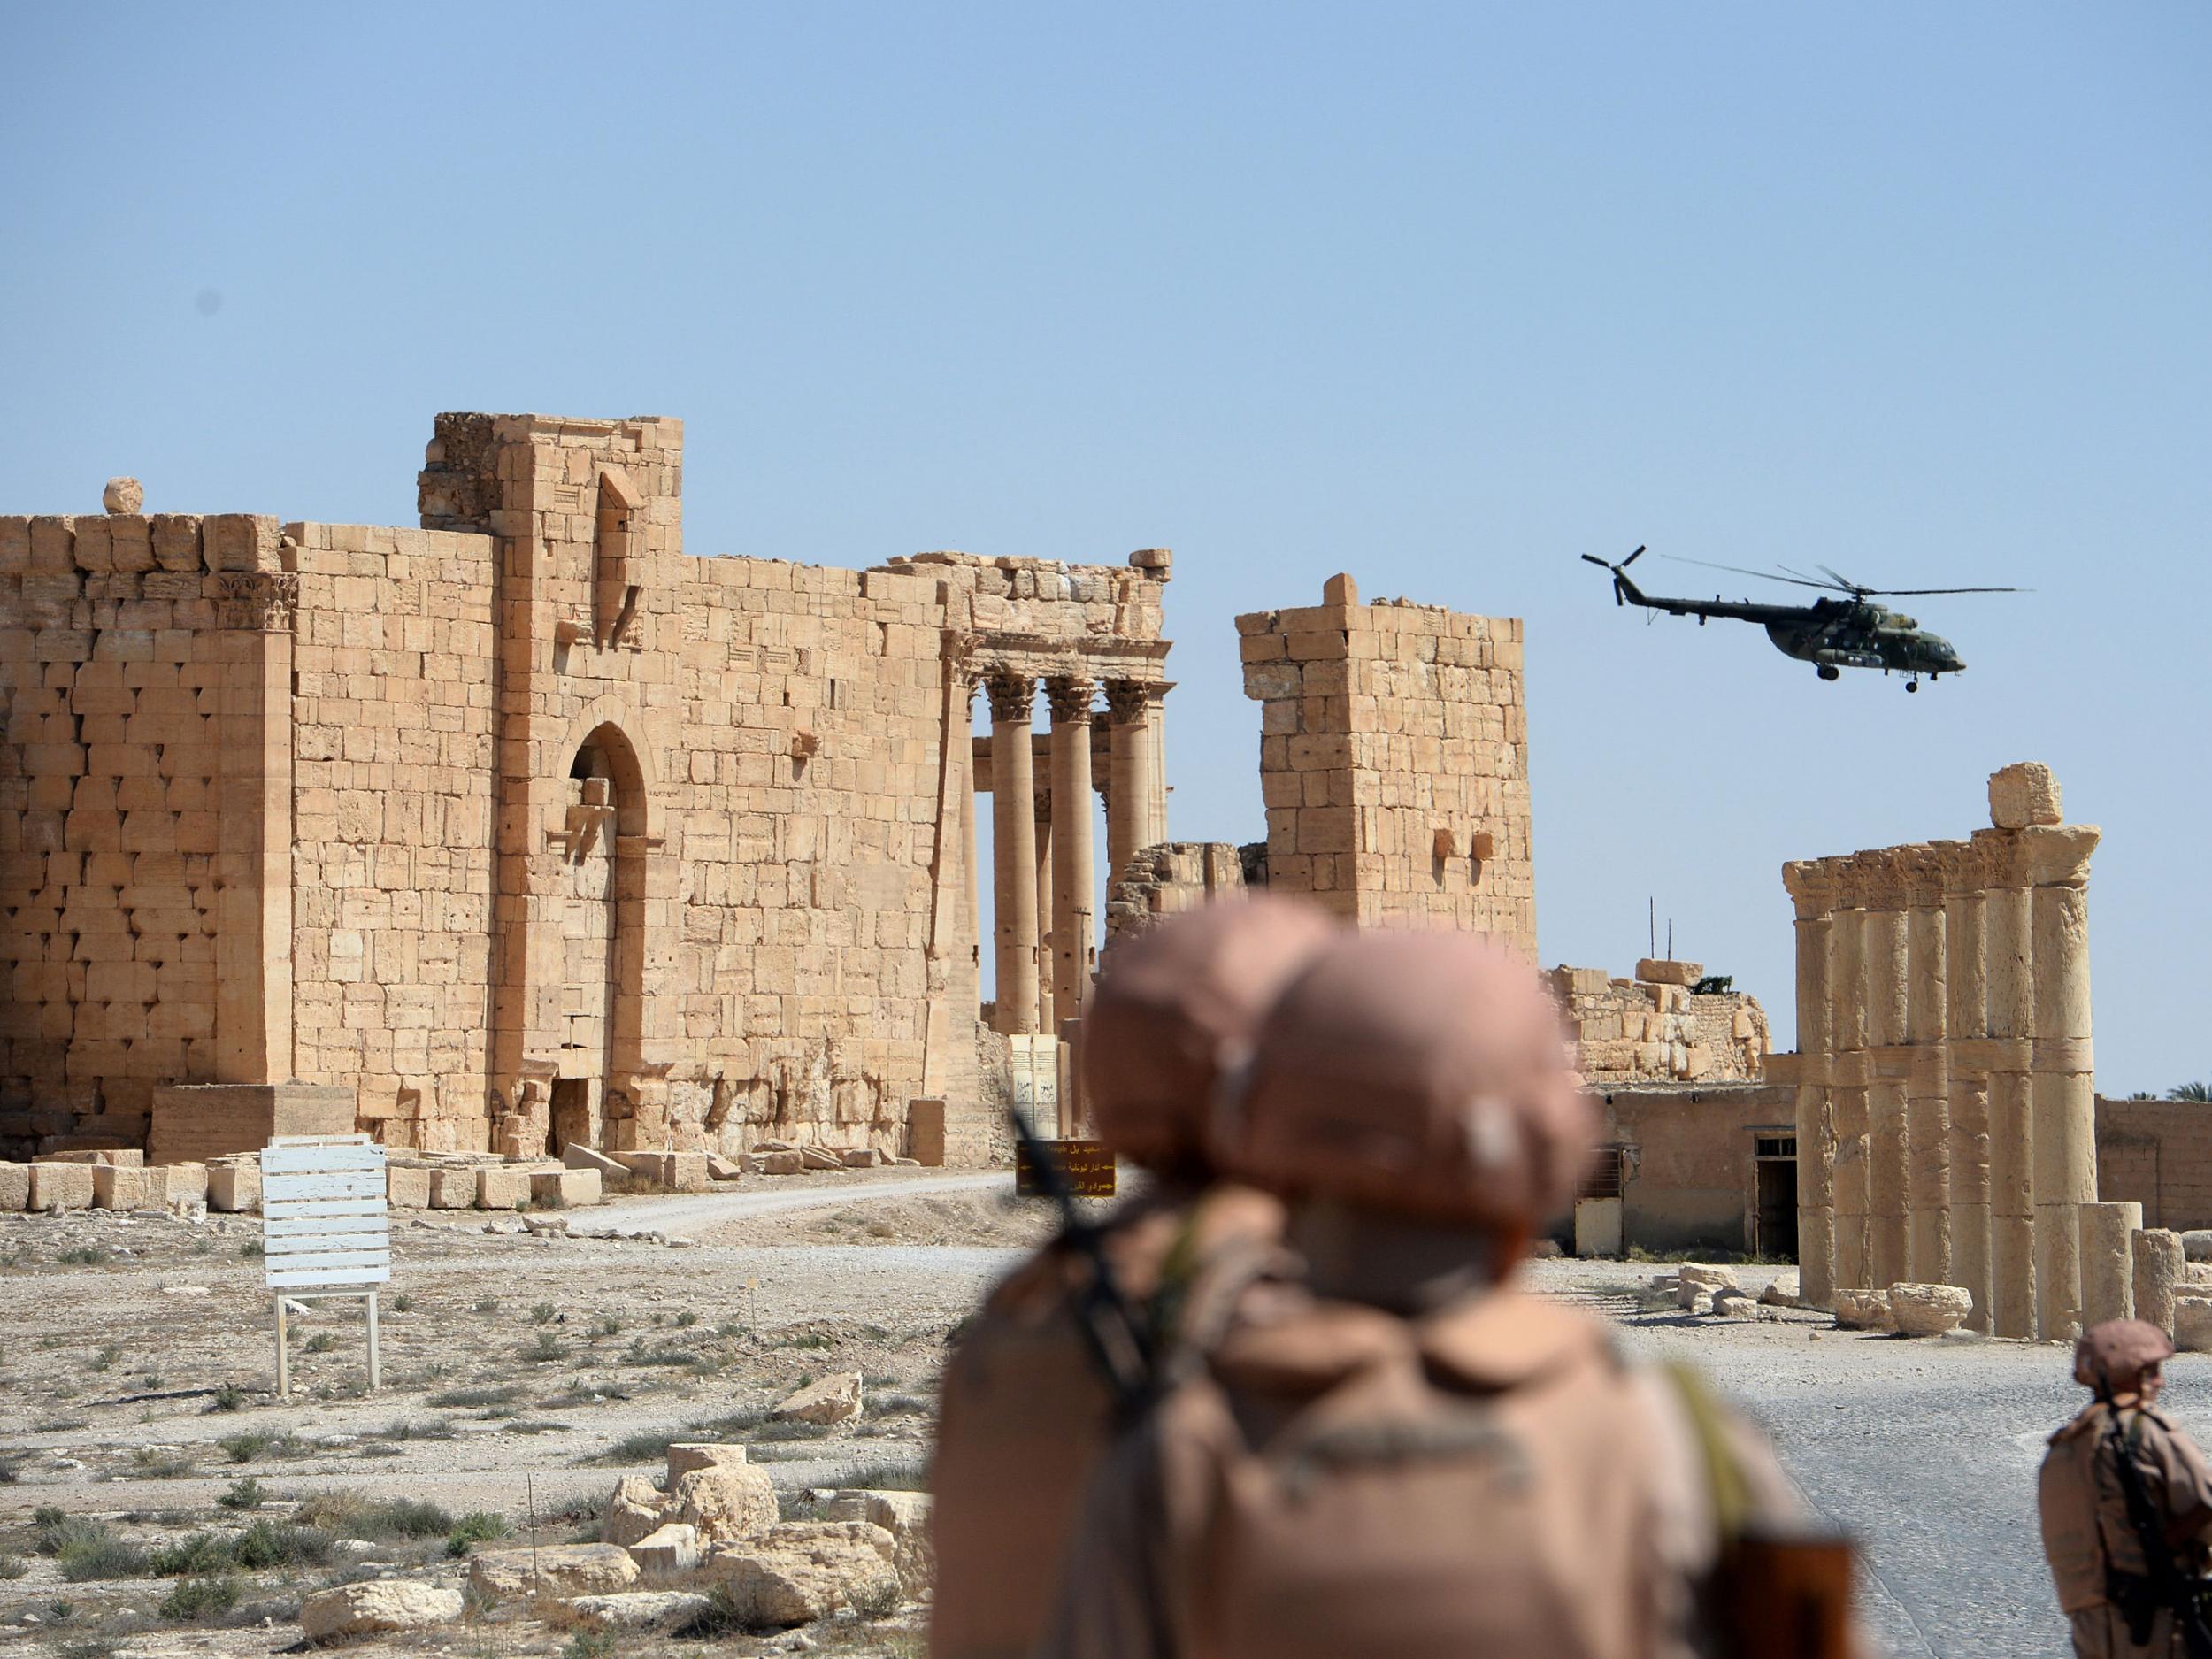 Russian forces patrol the ancient site since it was Isis was driven out by pro-Syrian government forces in March this year